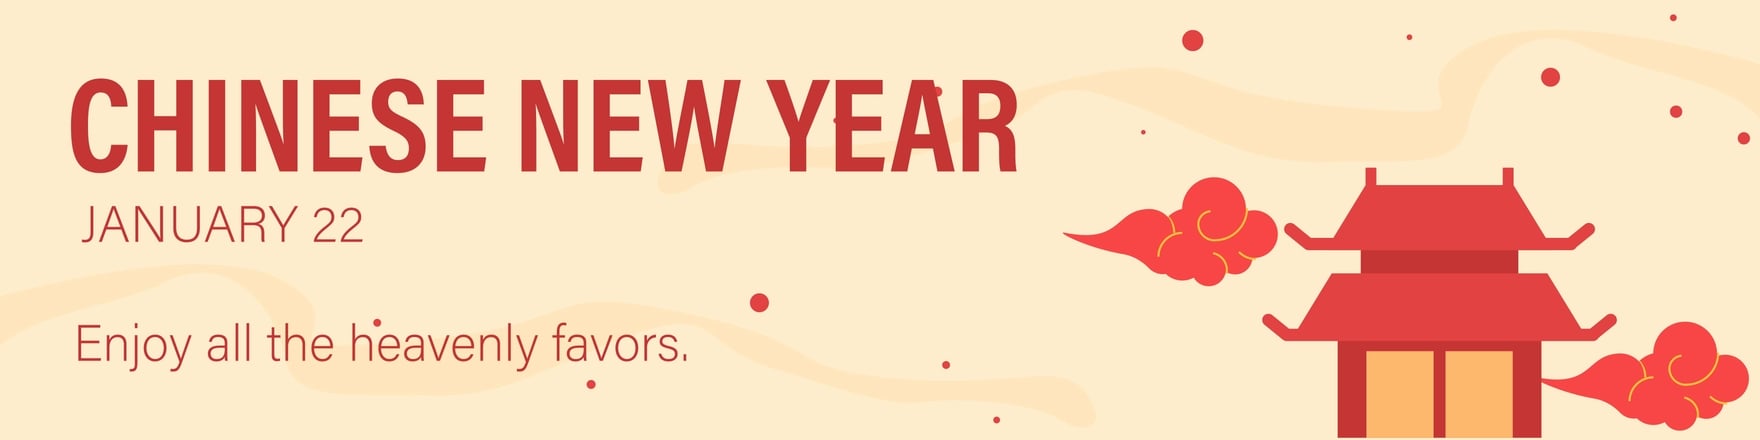 Chinese New Year Linkedin Banner